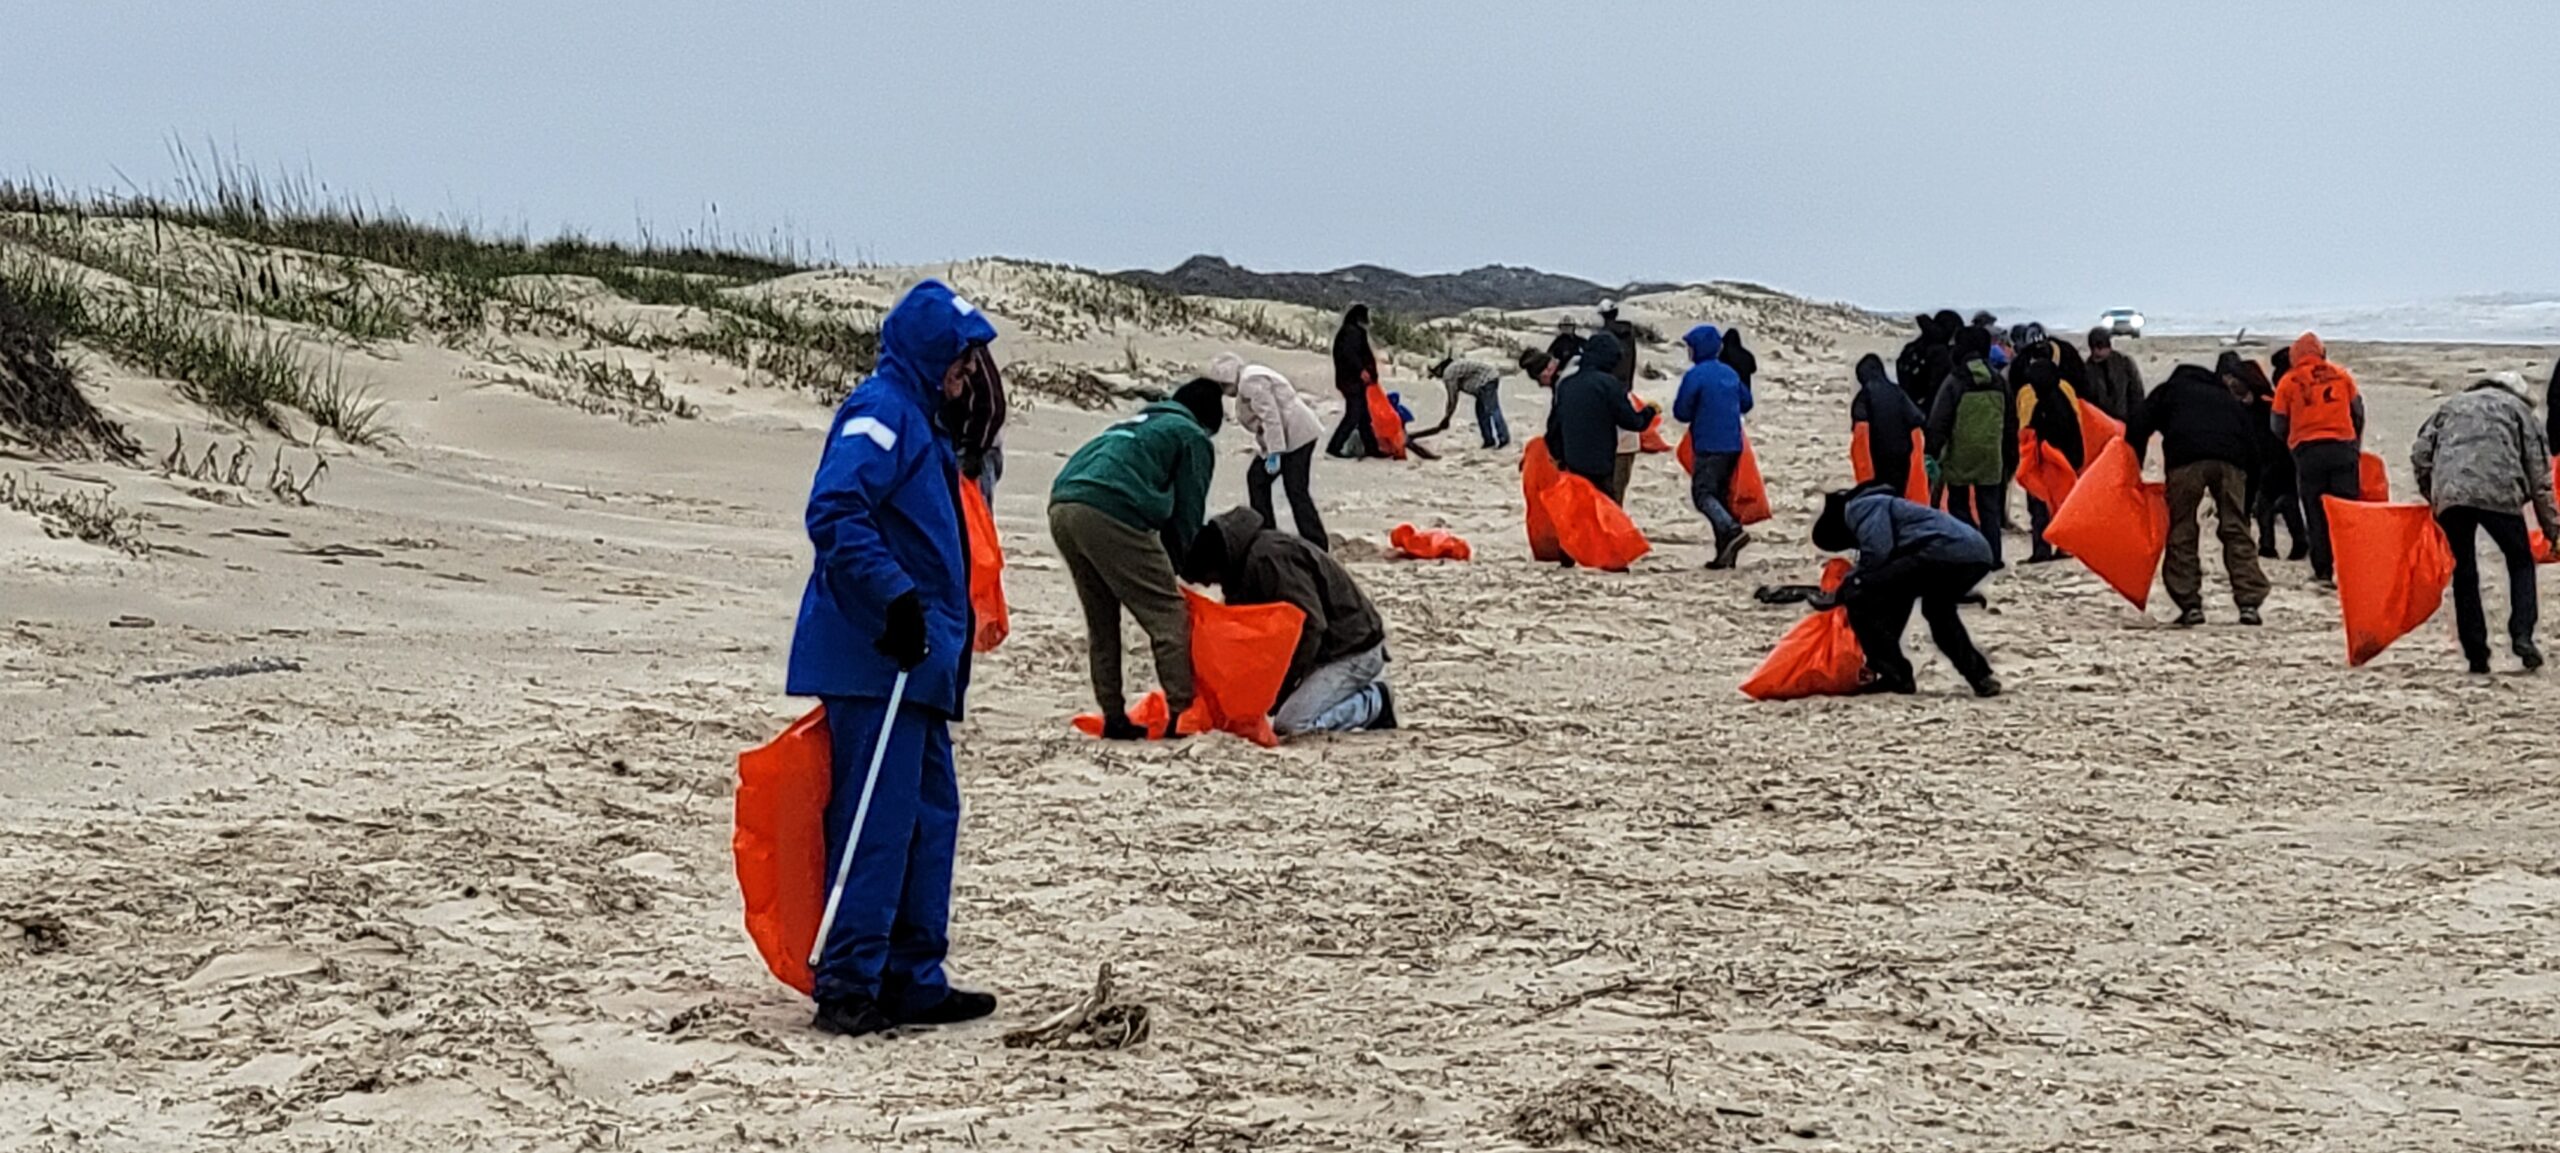 Billy Sandifer Big Shell Beach cleanup - volunteers picking up trash on the beach